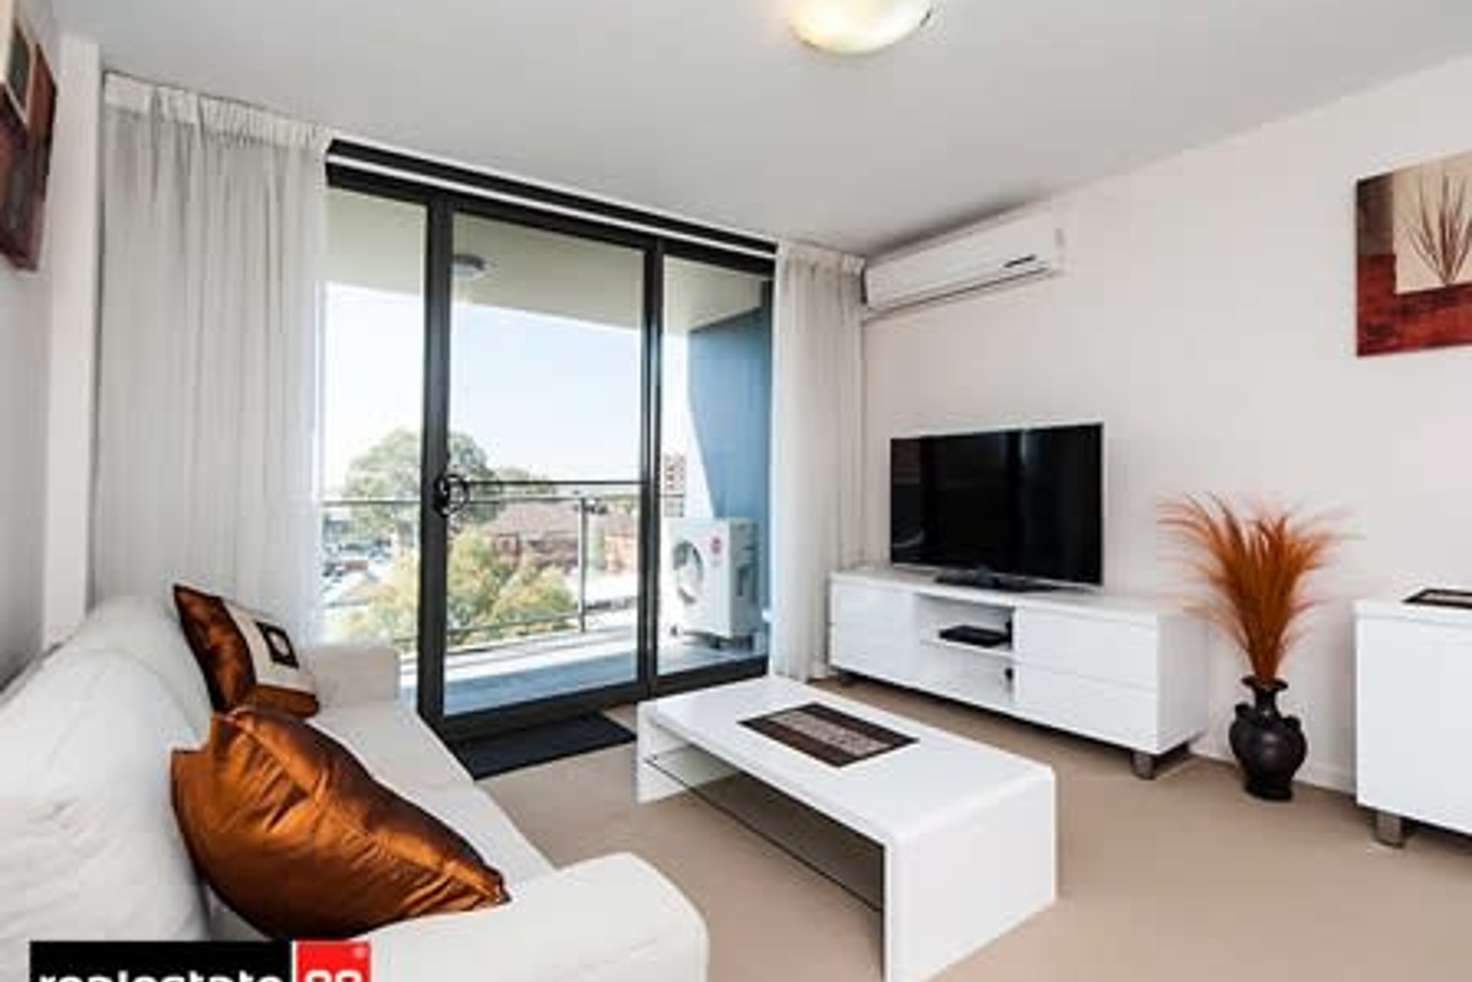 Main view of Homely apartment listing, 133/369 Hay Street, Perth WA 6000